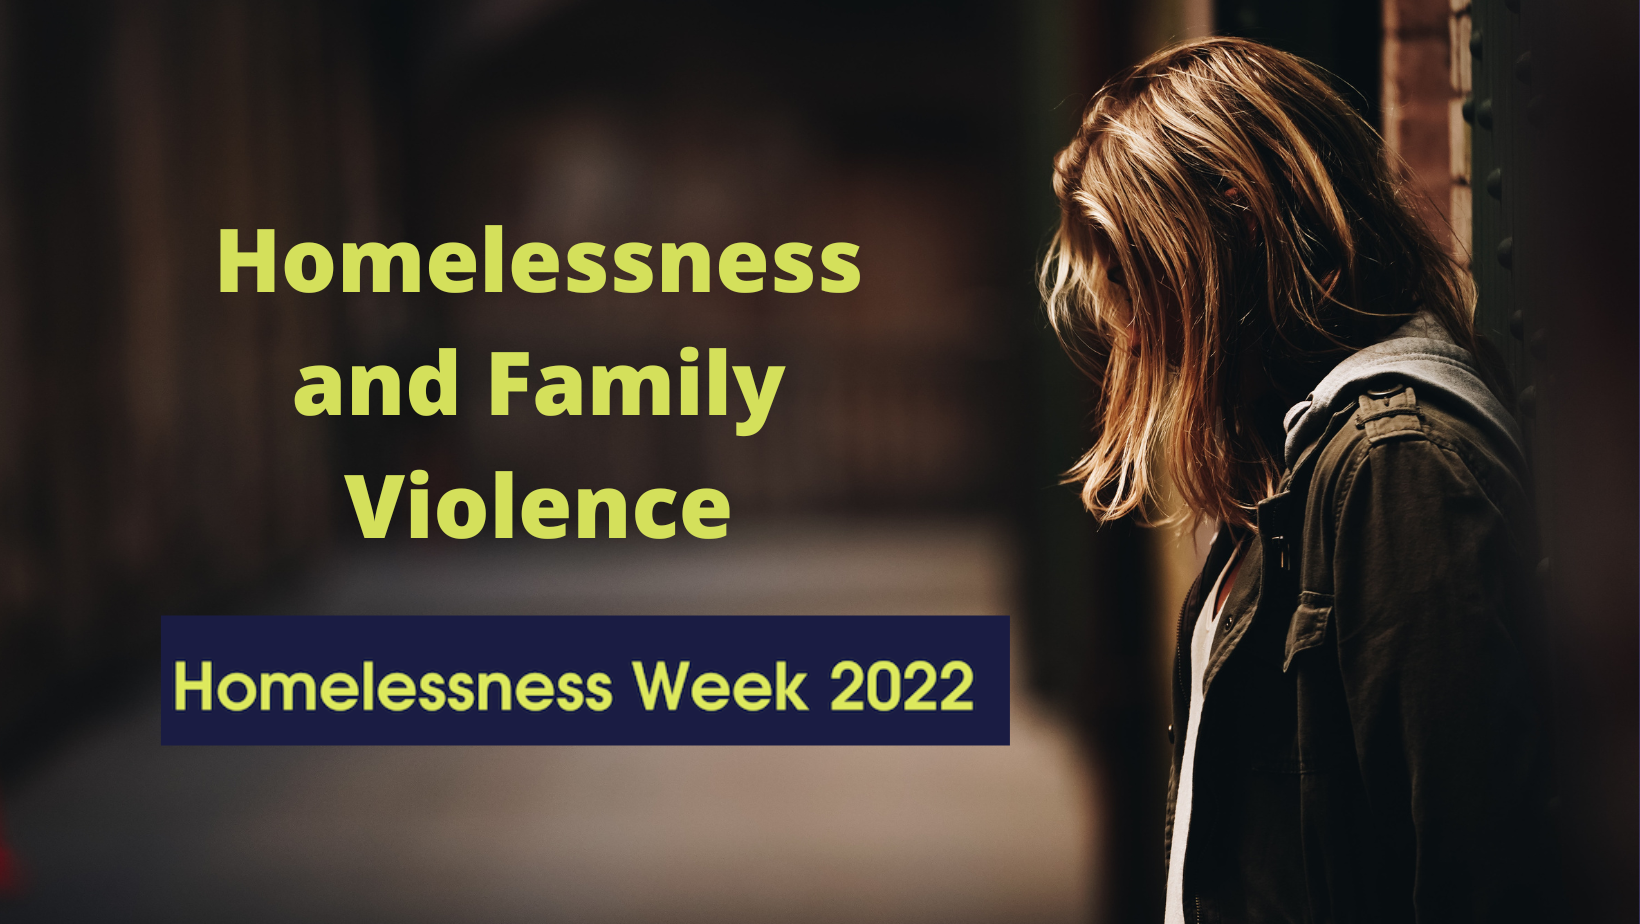 Homelessness and Family Violence image